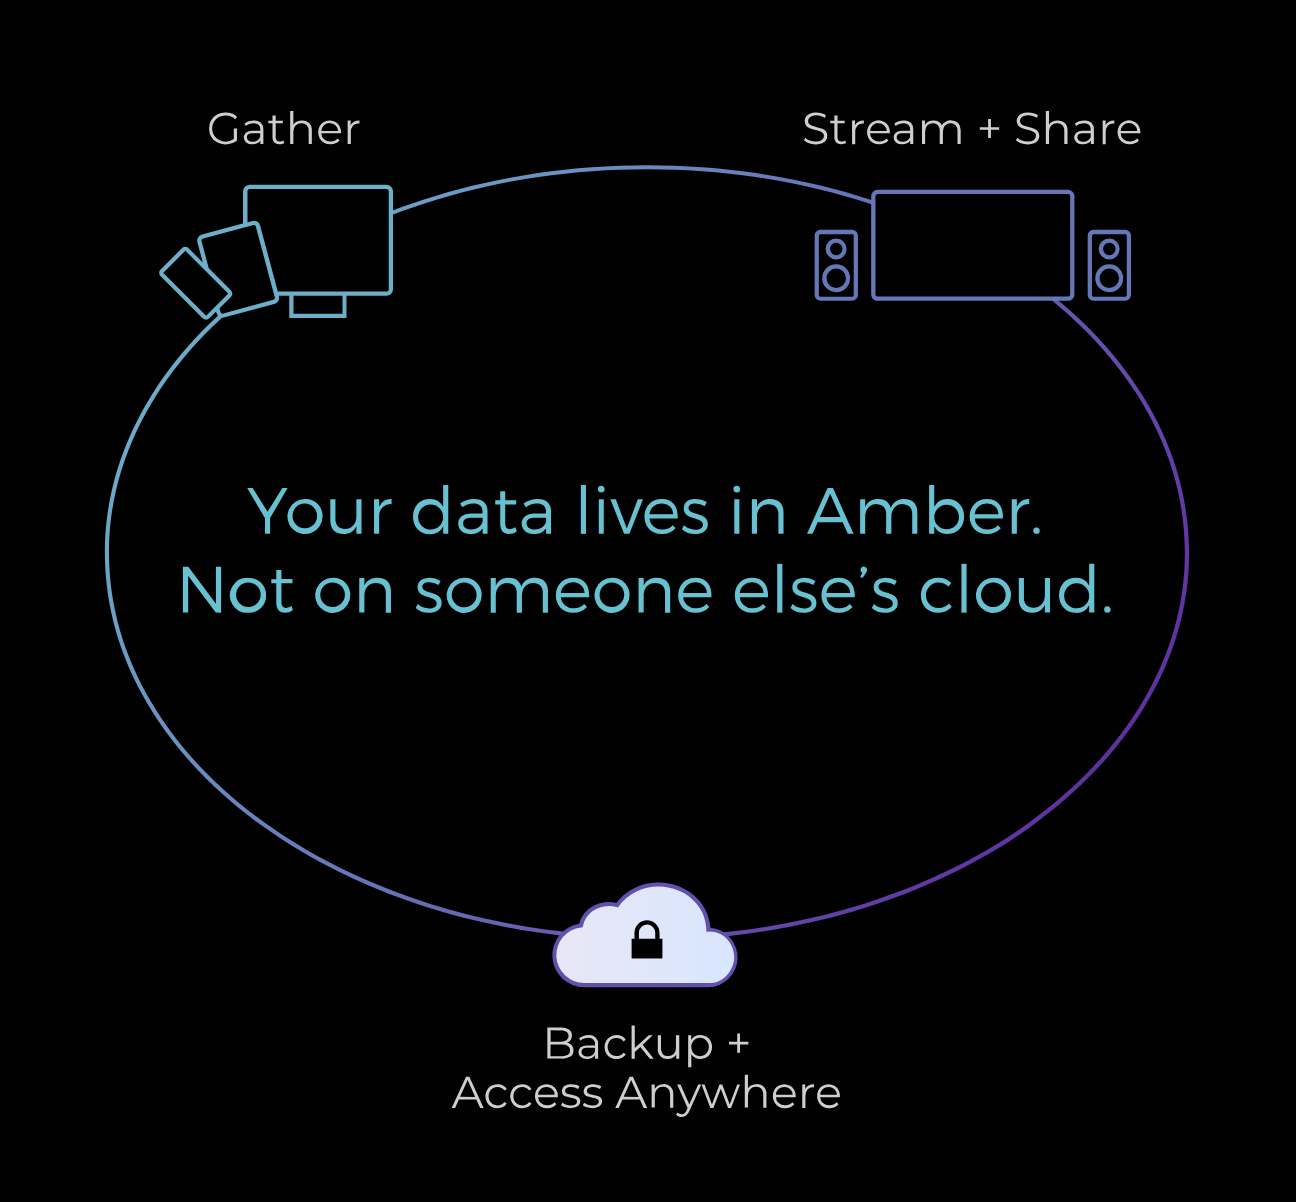 Your data lives in Amber, not on someone else's cloud